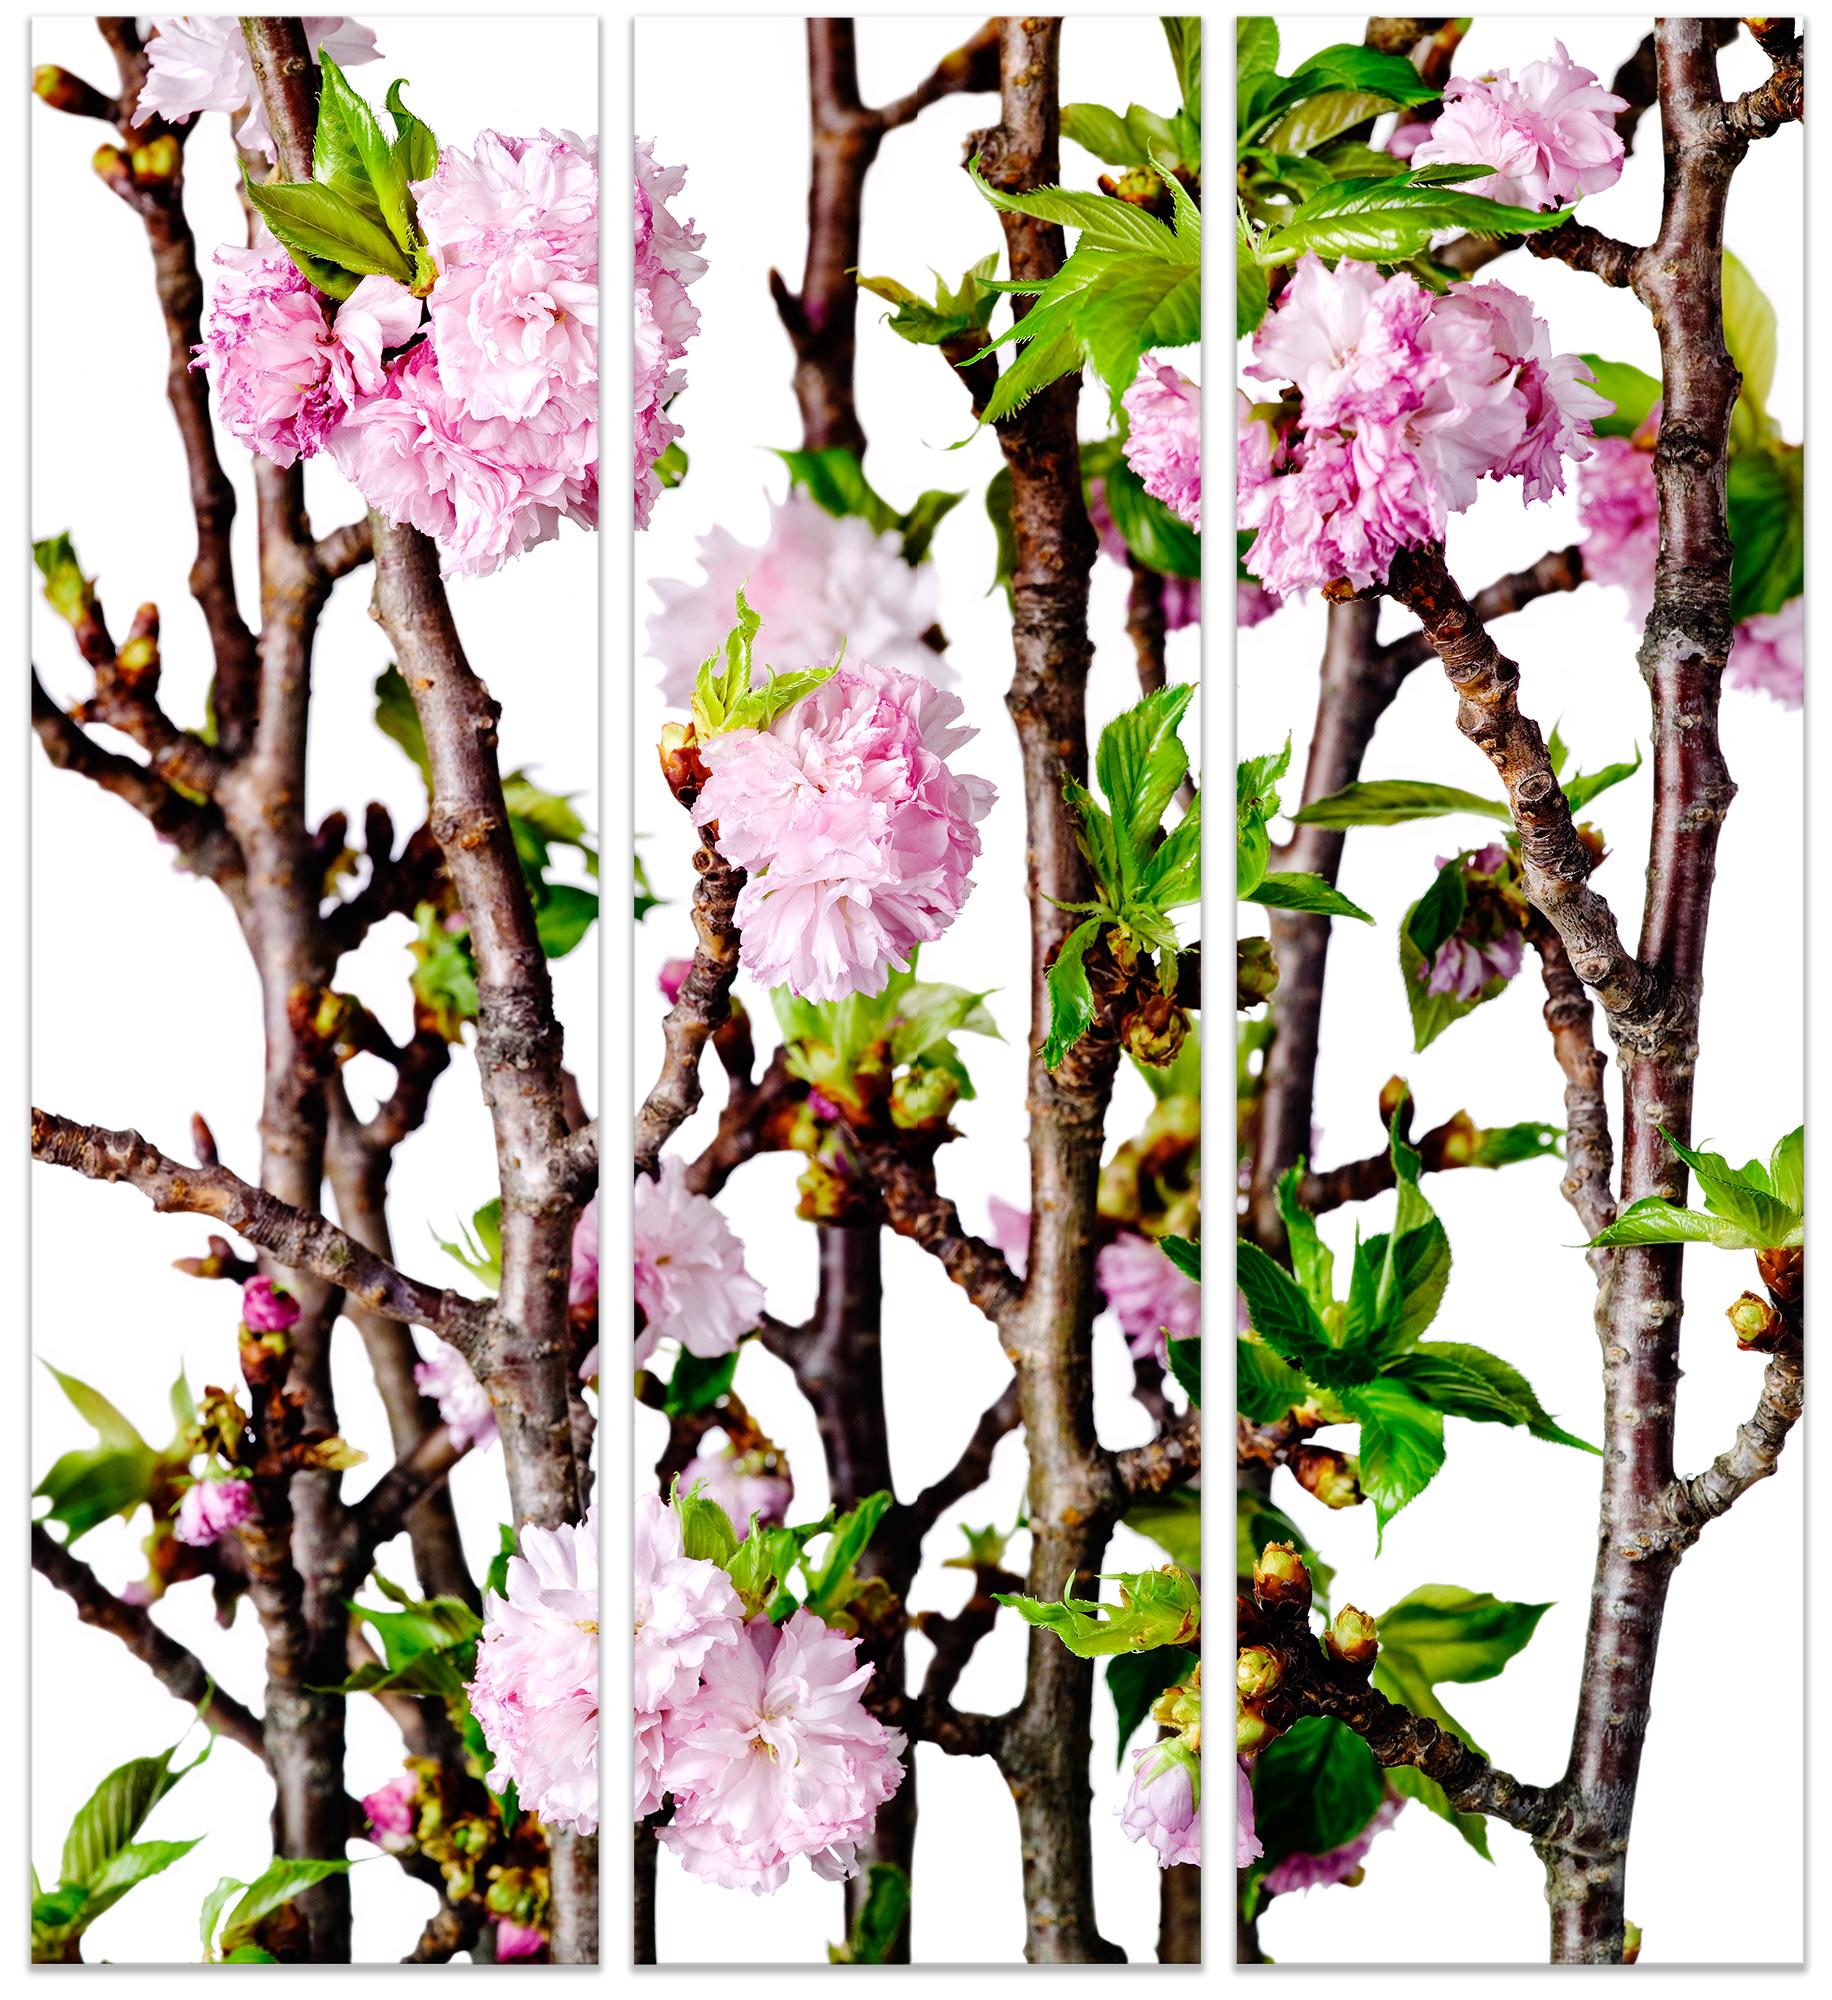 Albert Delamour Color Photograph - CHERRY BLOSSOM TRIPTYCH, large scale (66 x 59 ") on Dibond under Acrylic glass 